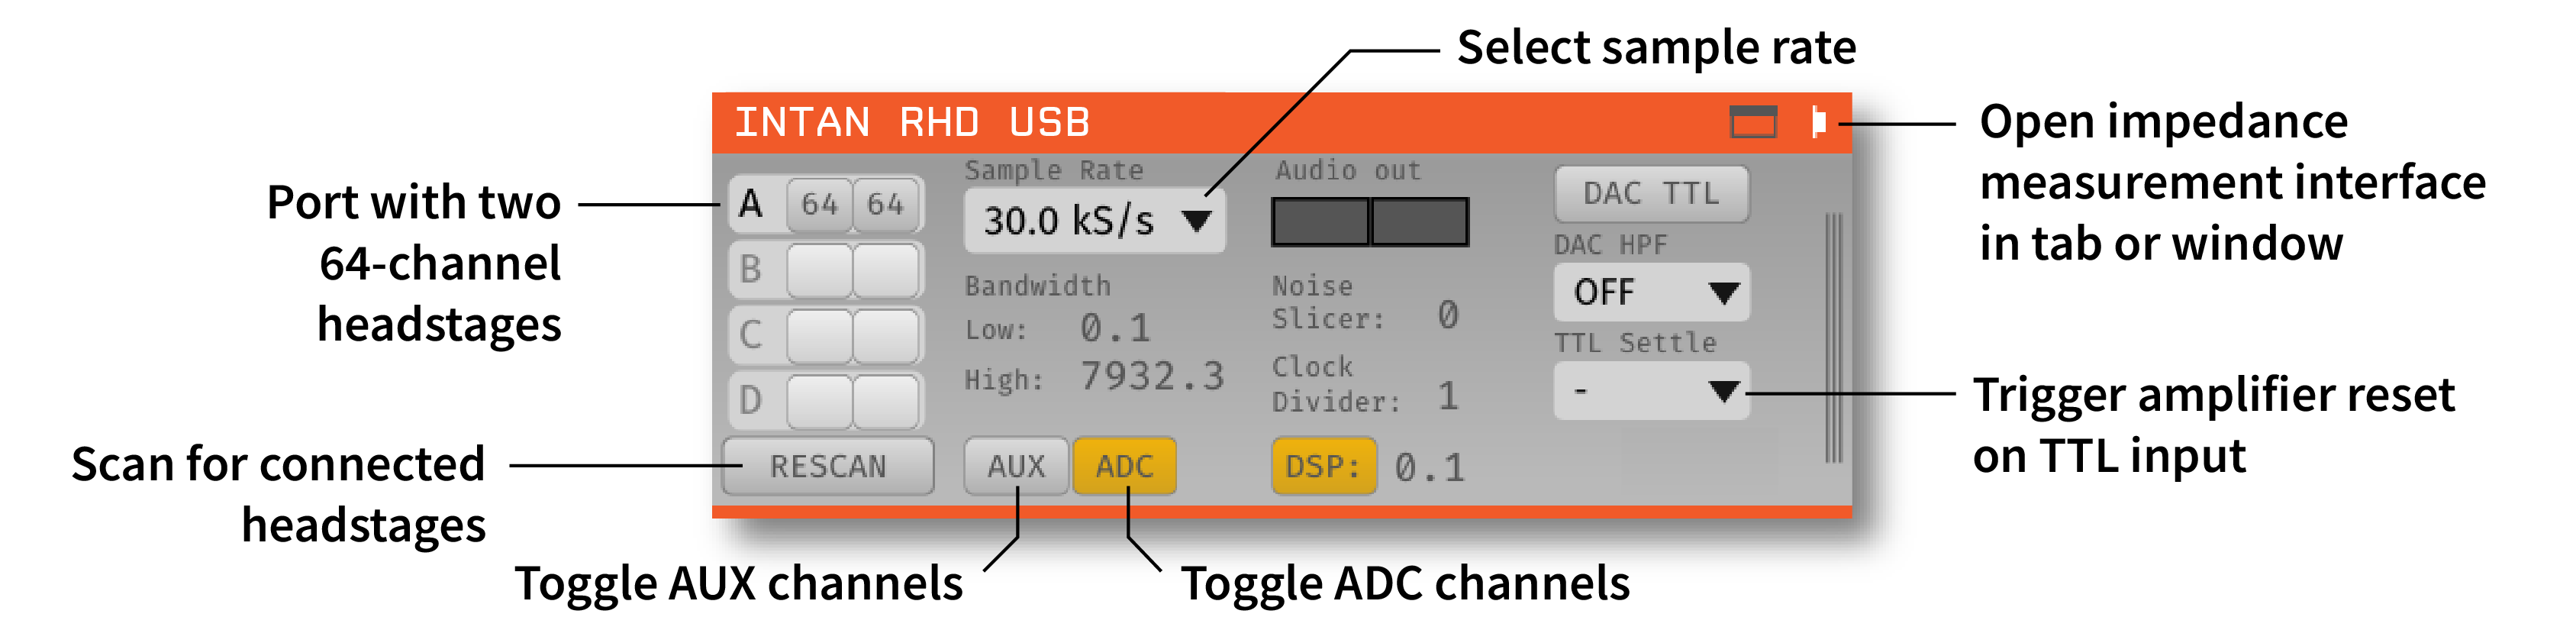 Annotated settings interface for the Intan RHD USB plugin